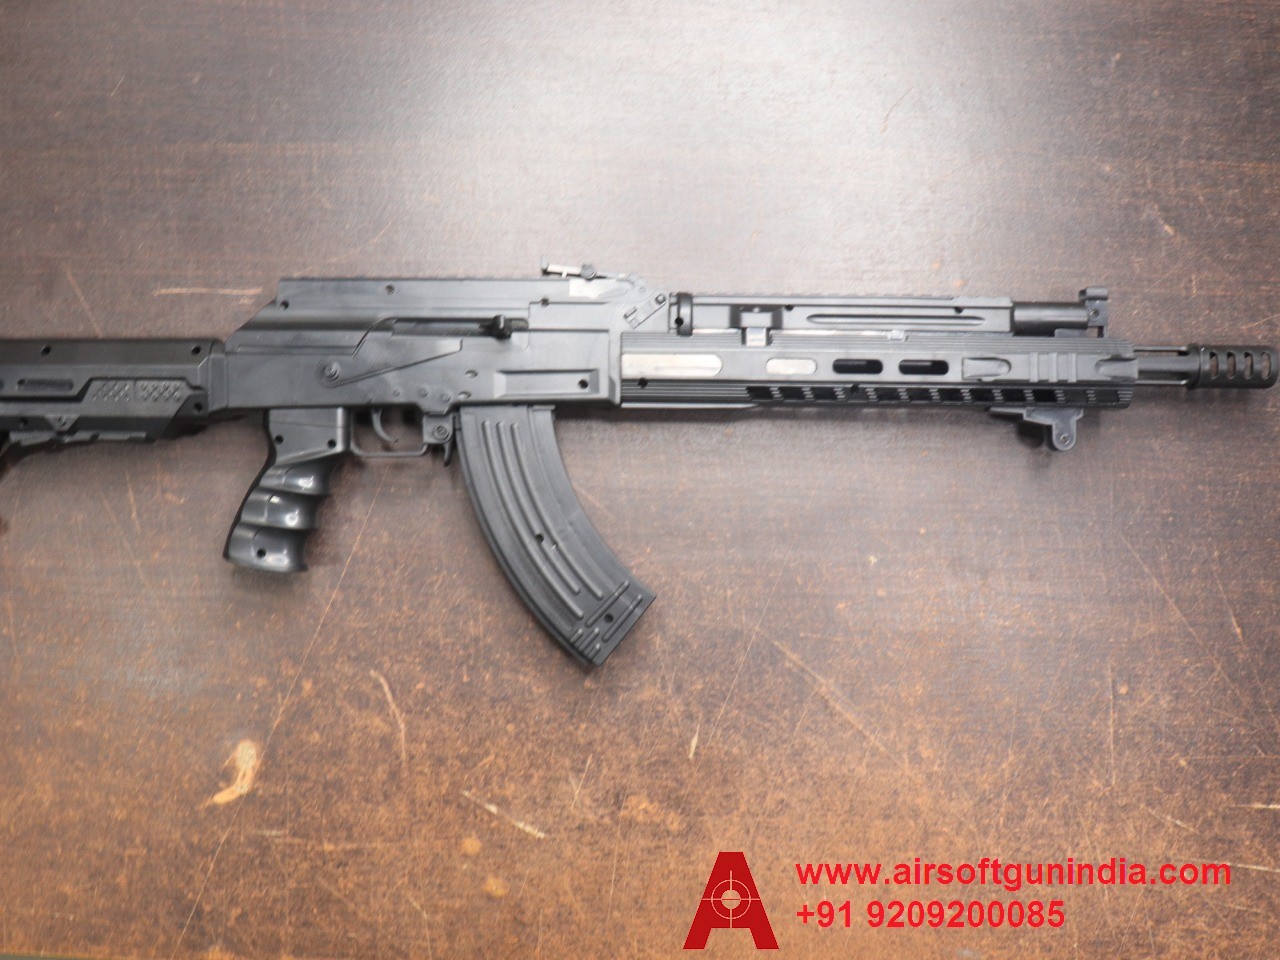 James Bond 007 Airsoft Toy Rifle By Airsoft Gun India